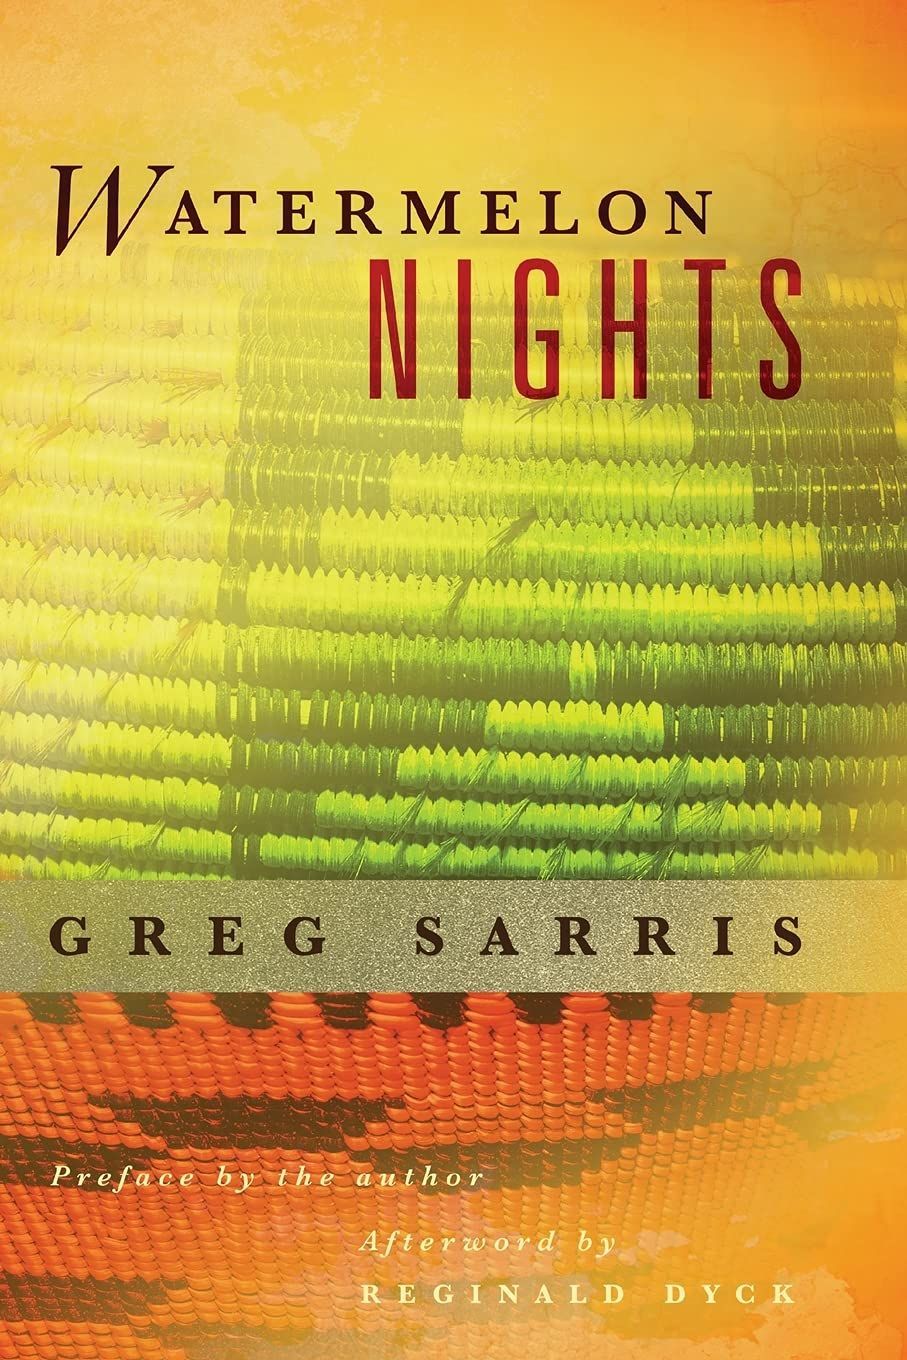 Interconnected Lives: On Greg Sarris’s “Watermelon Nights”